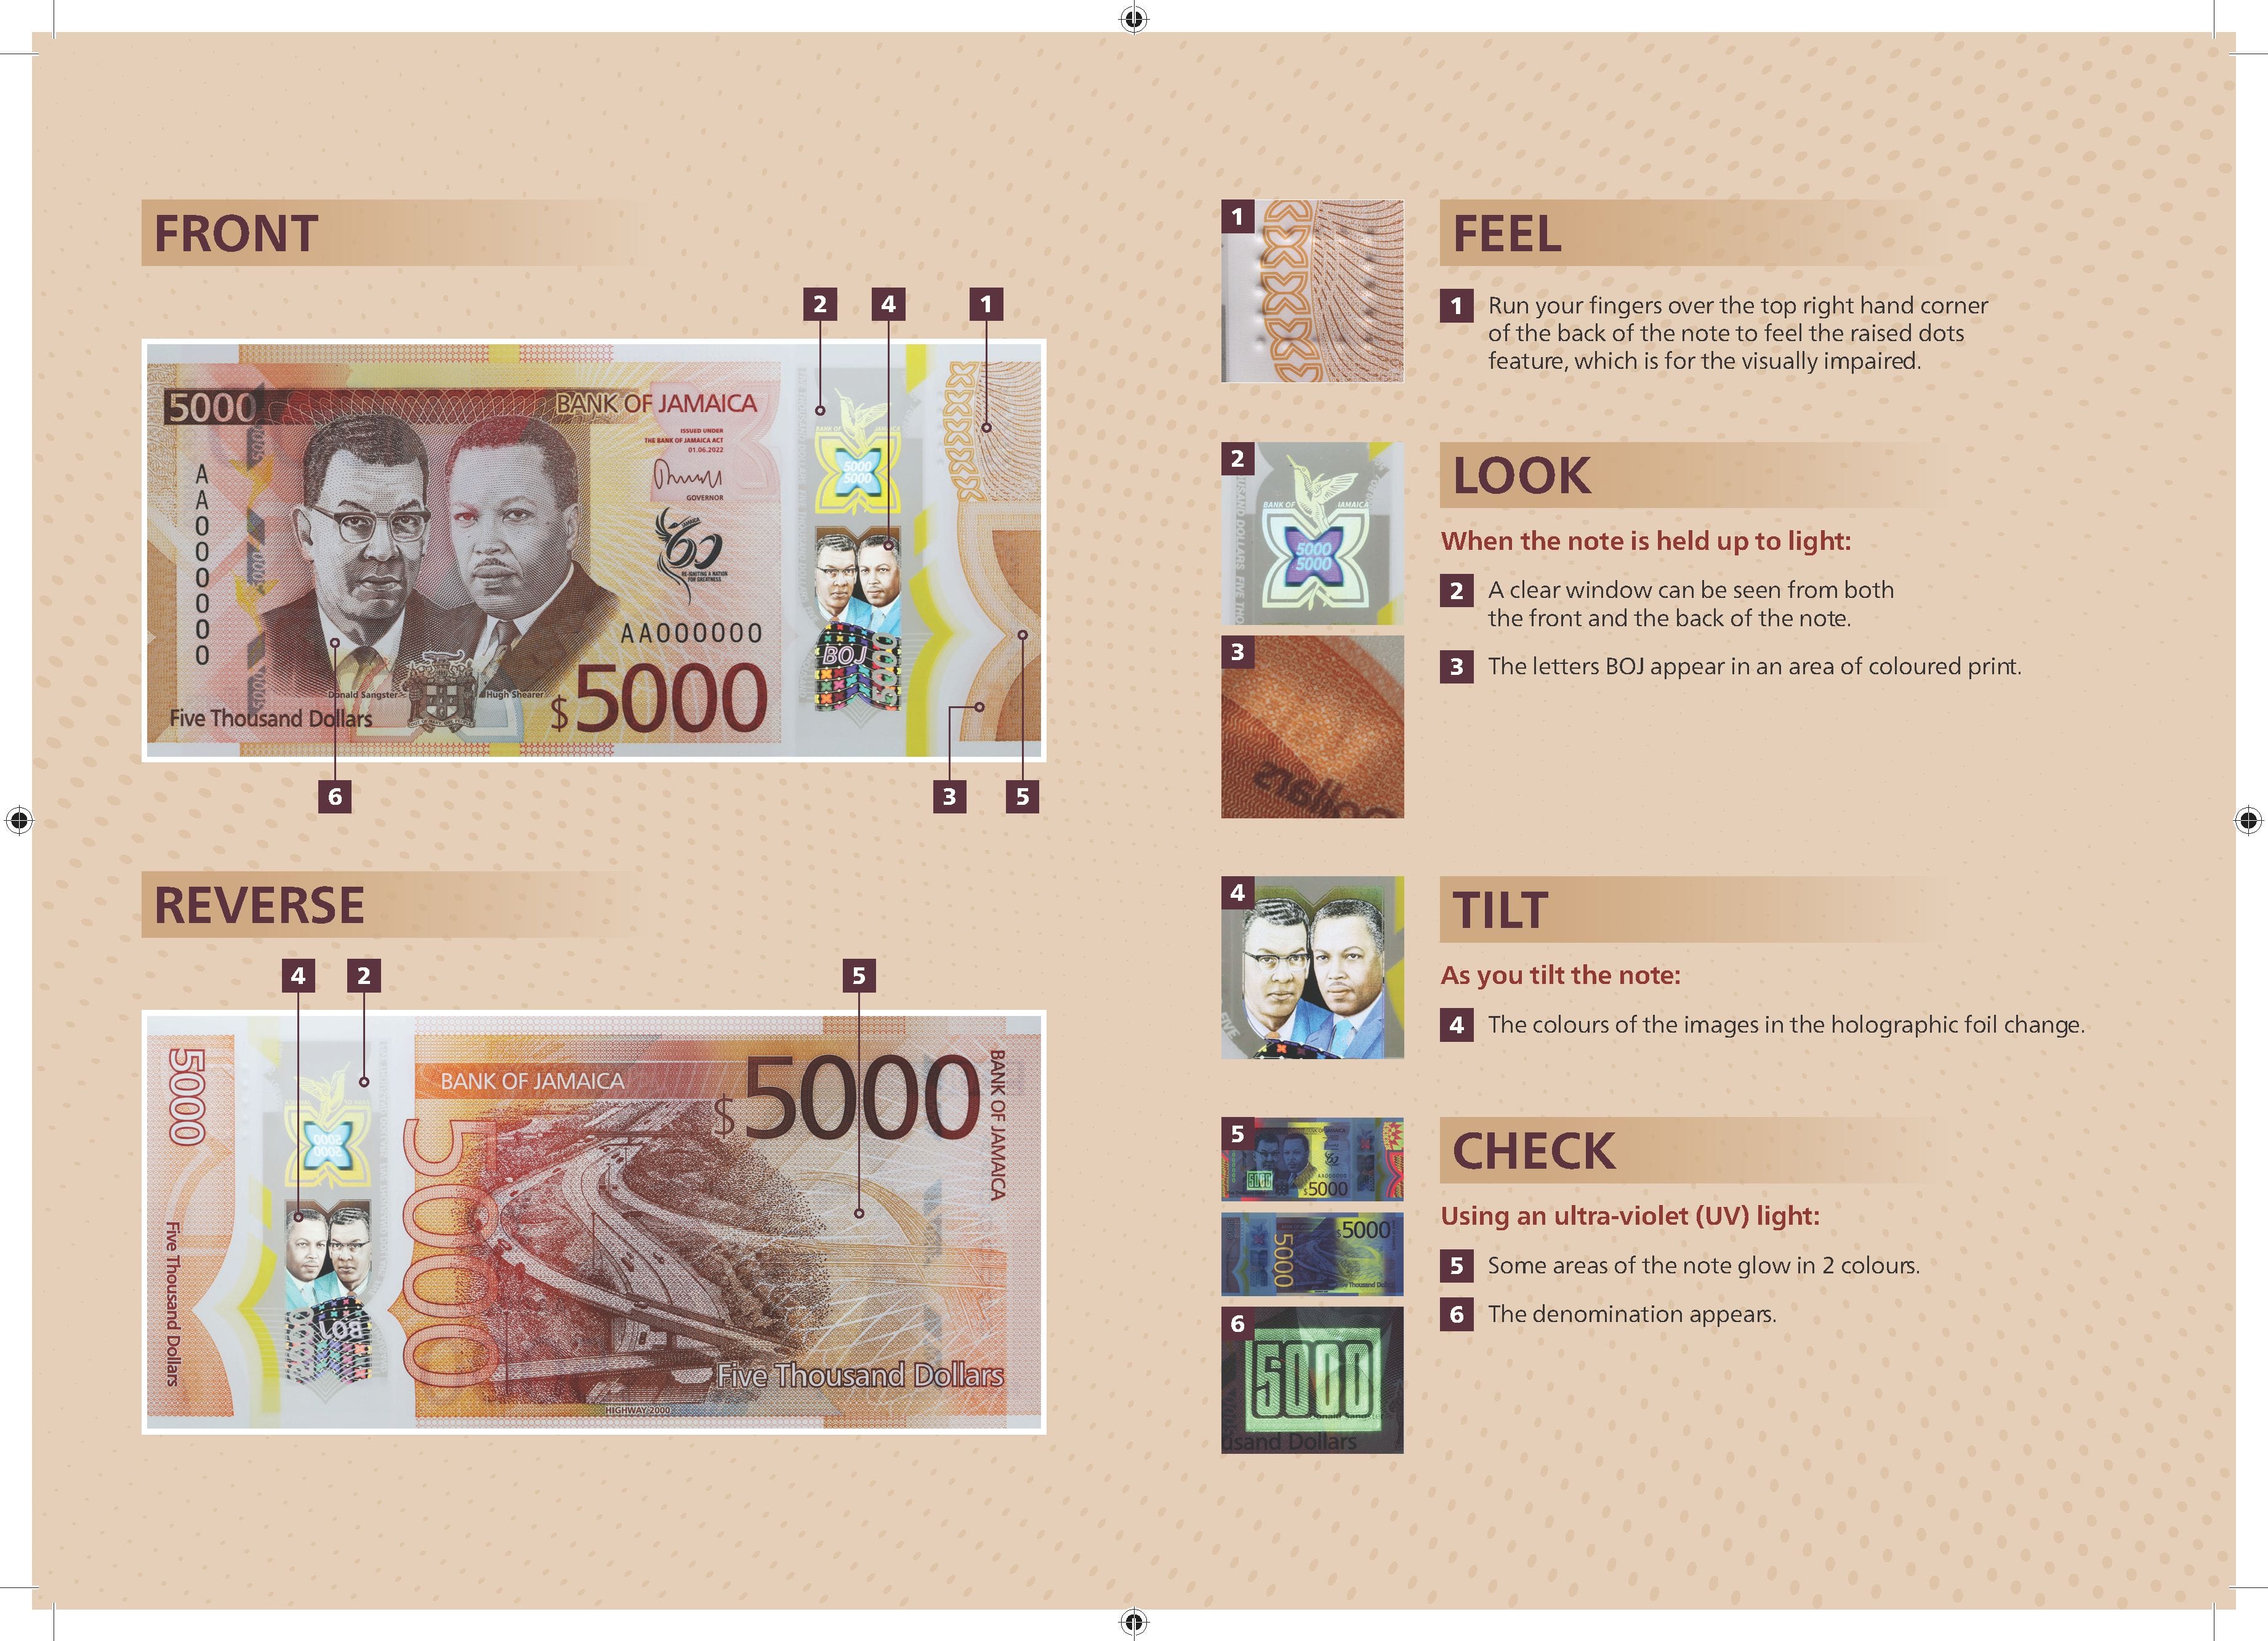 New $5000 note